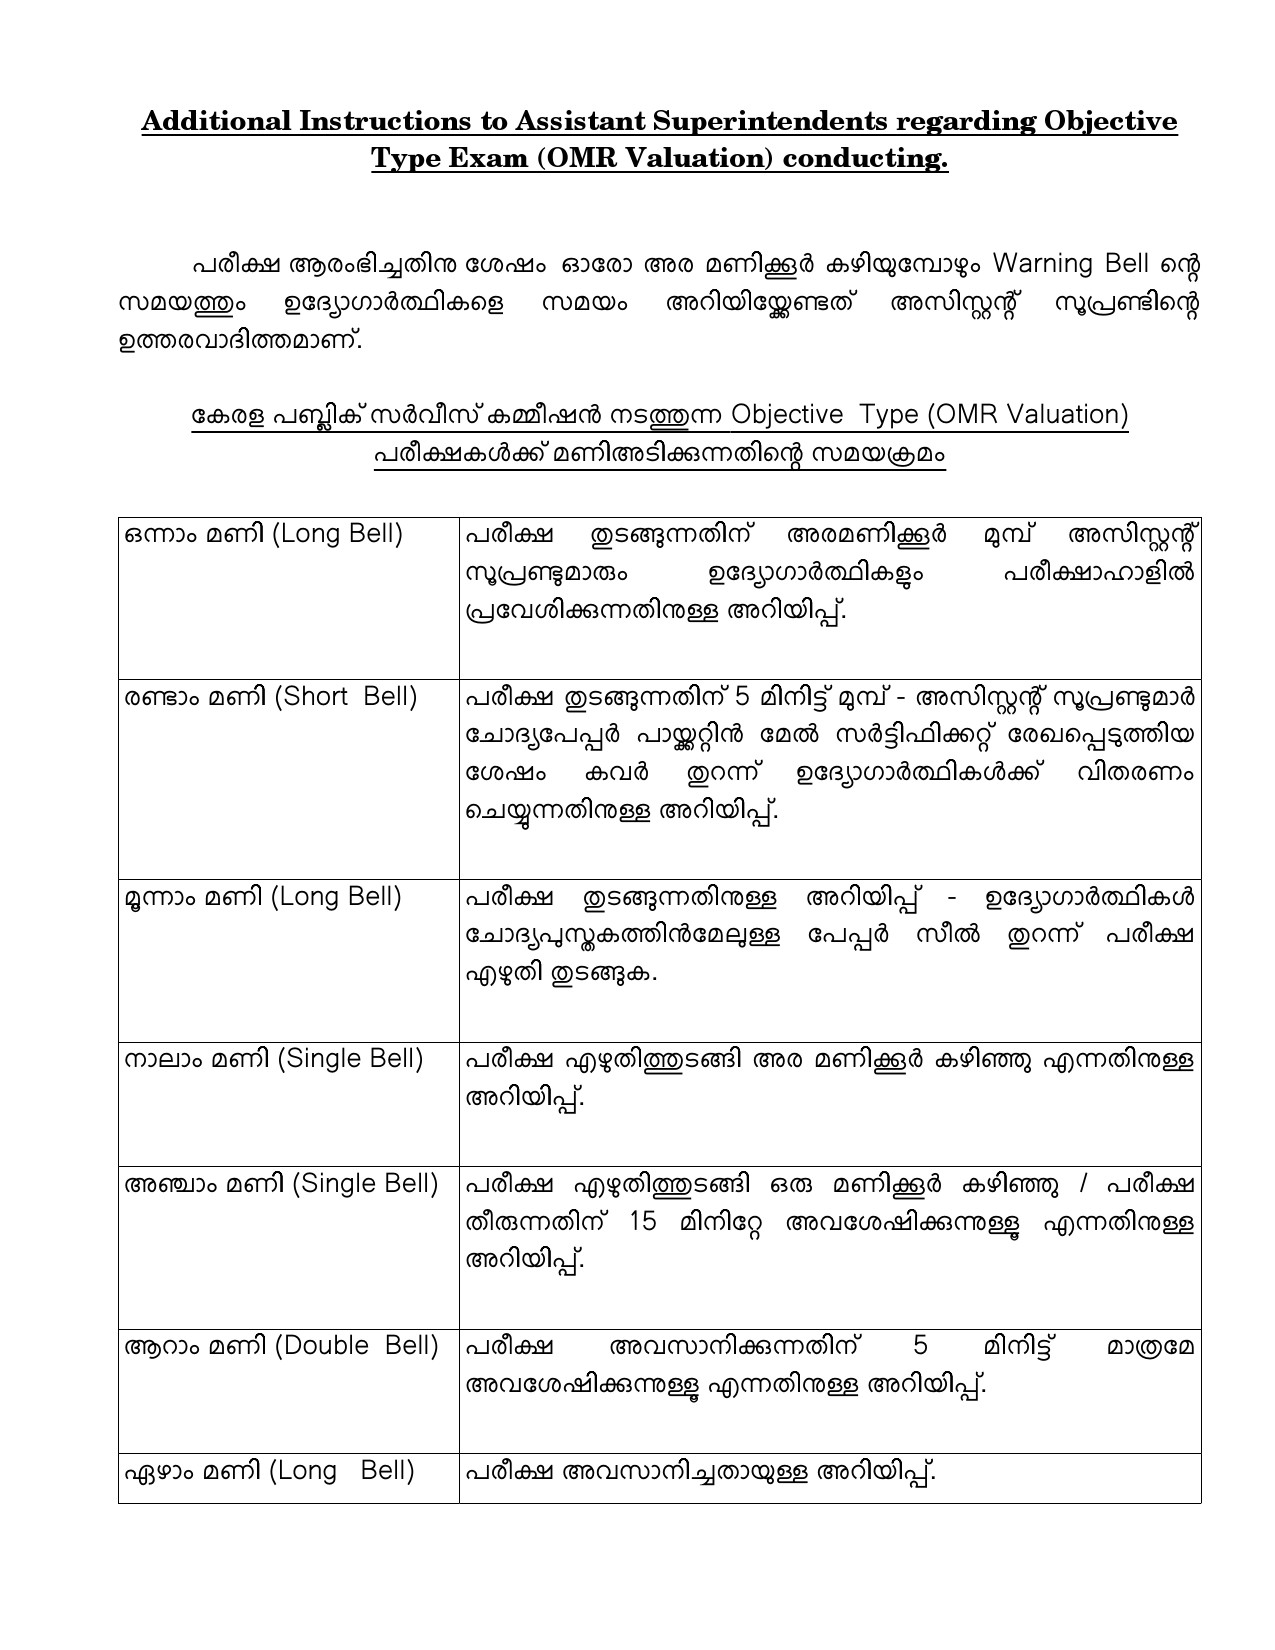 KPSC Must Know Objective Type Exam conducting - Notification Image 1